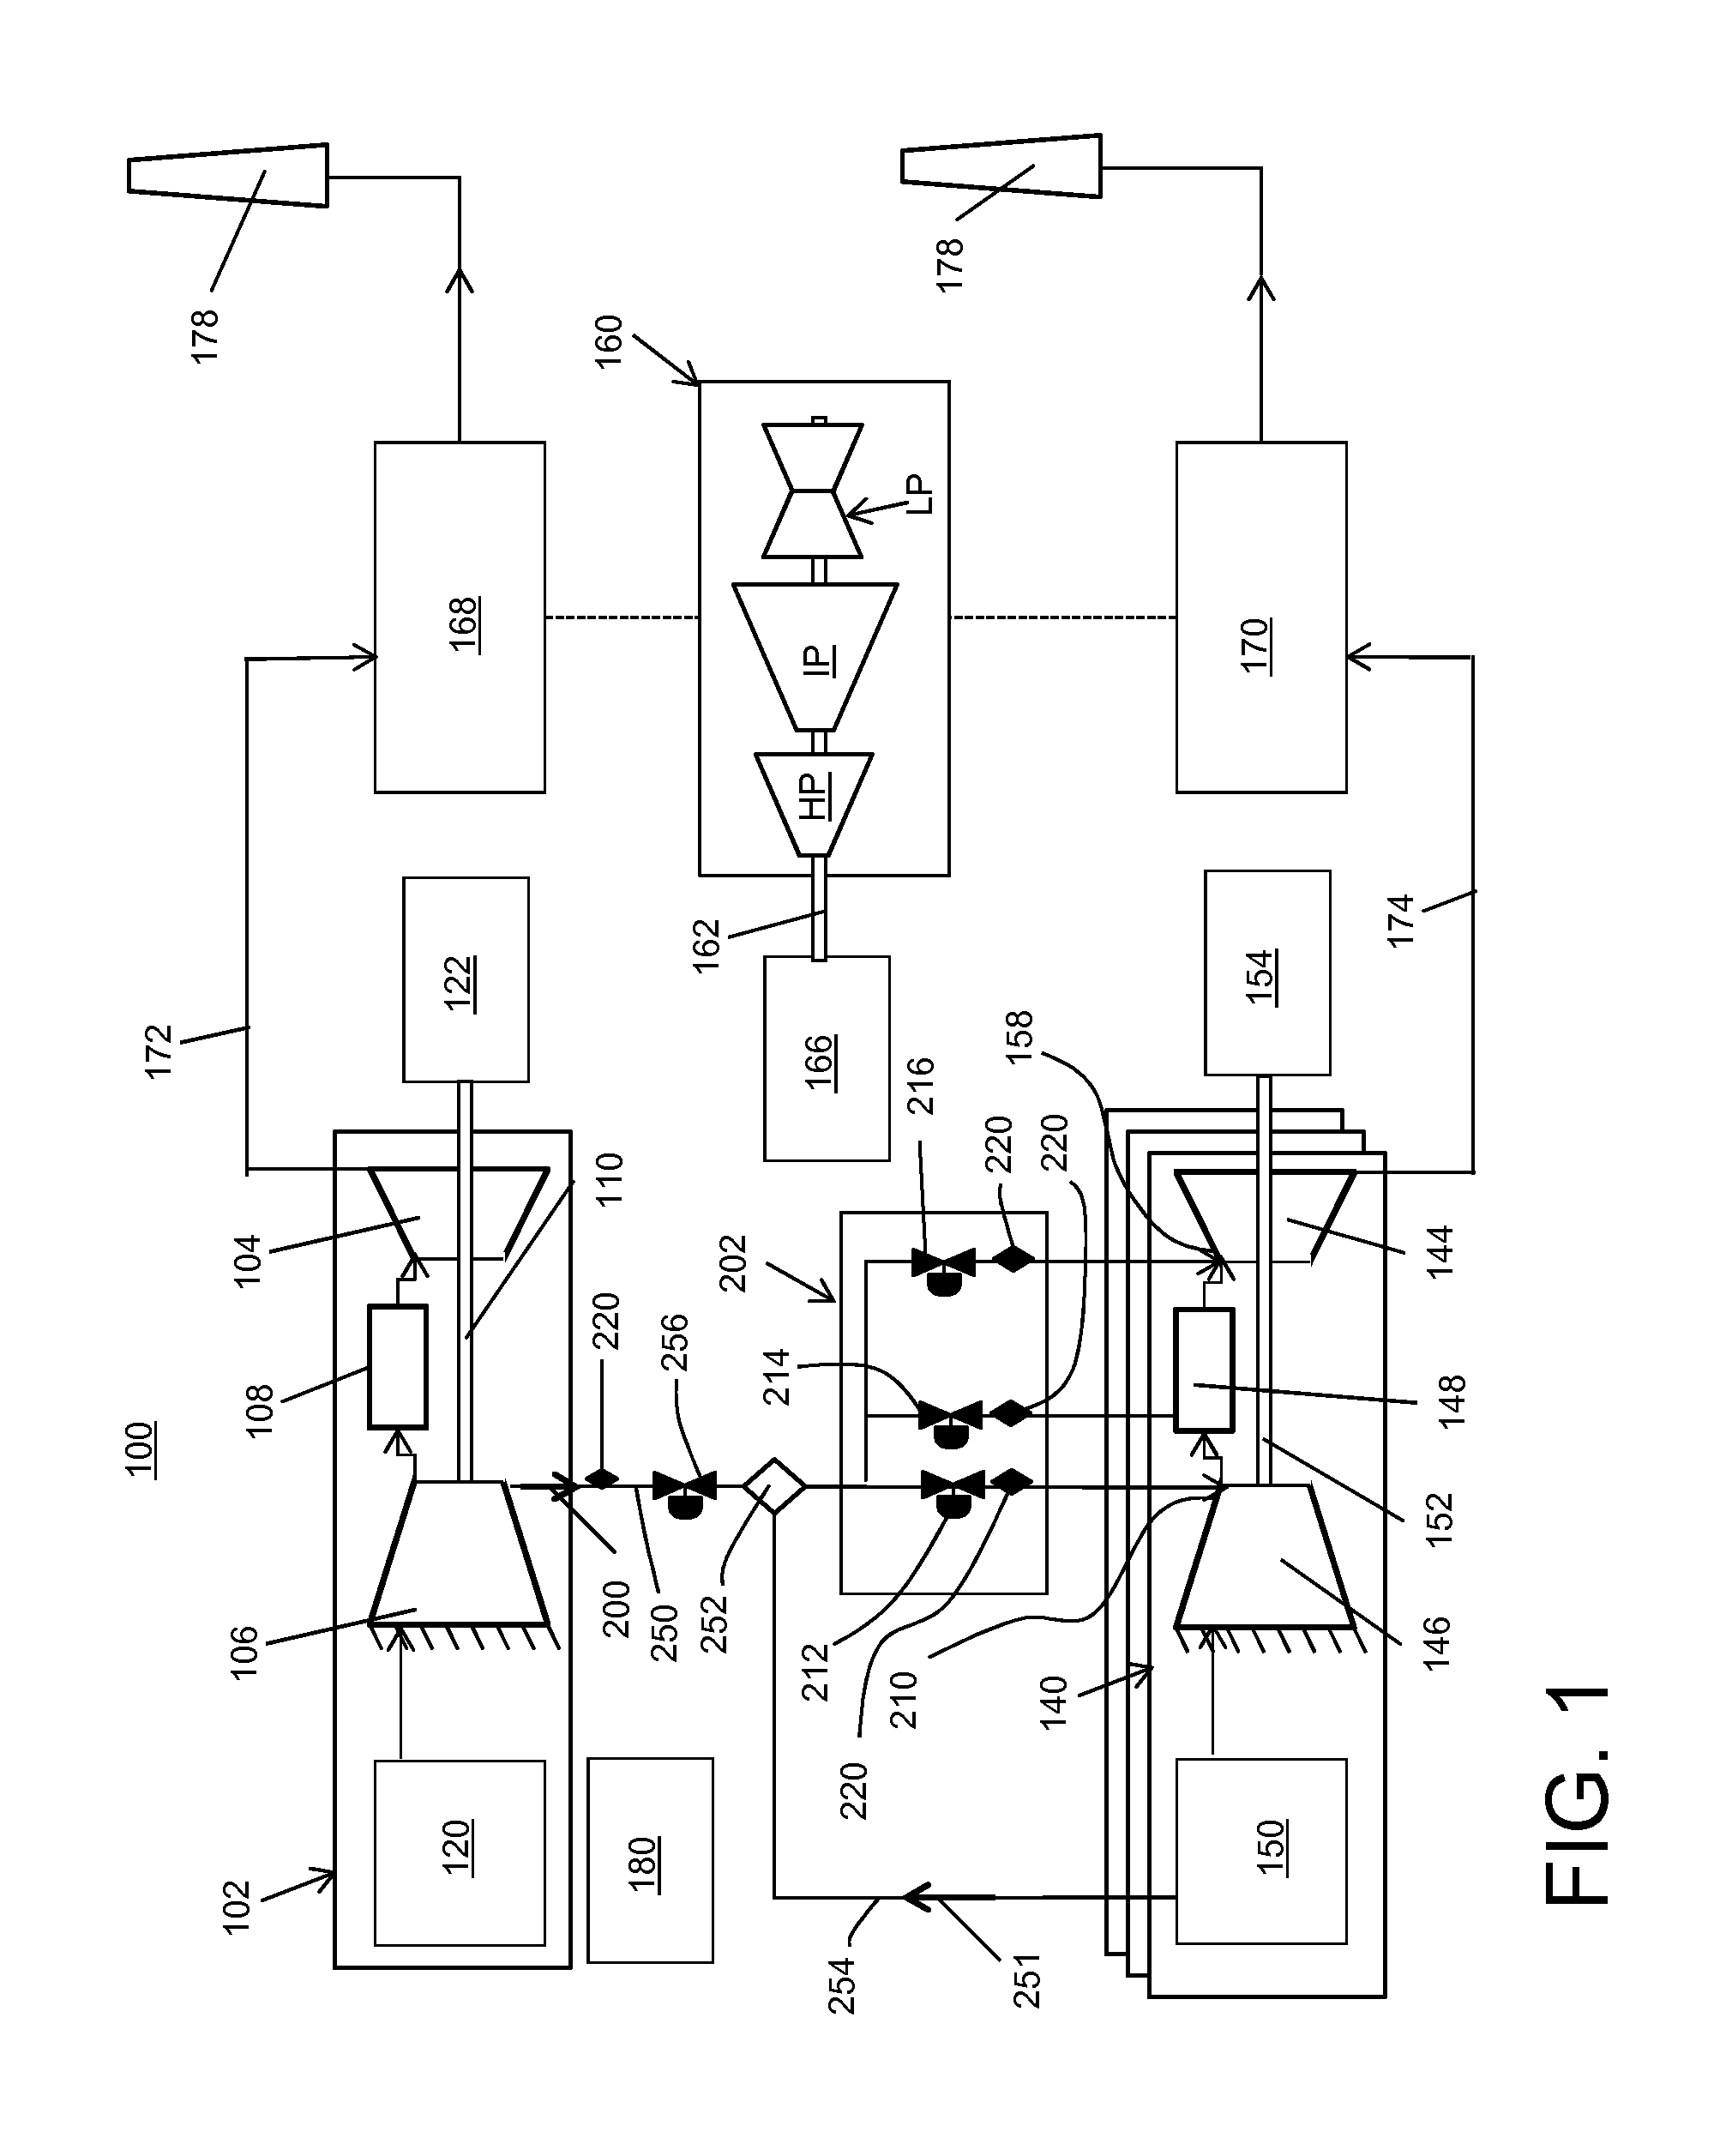 Power generation system having compressor creating excess air flow and eductor augmentation